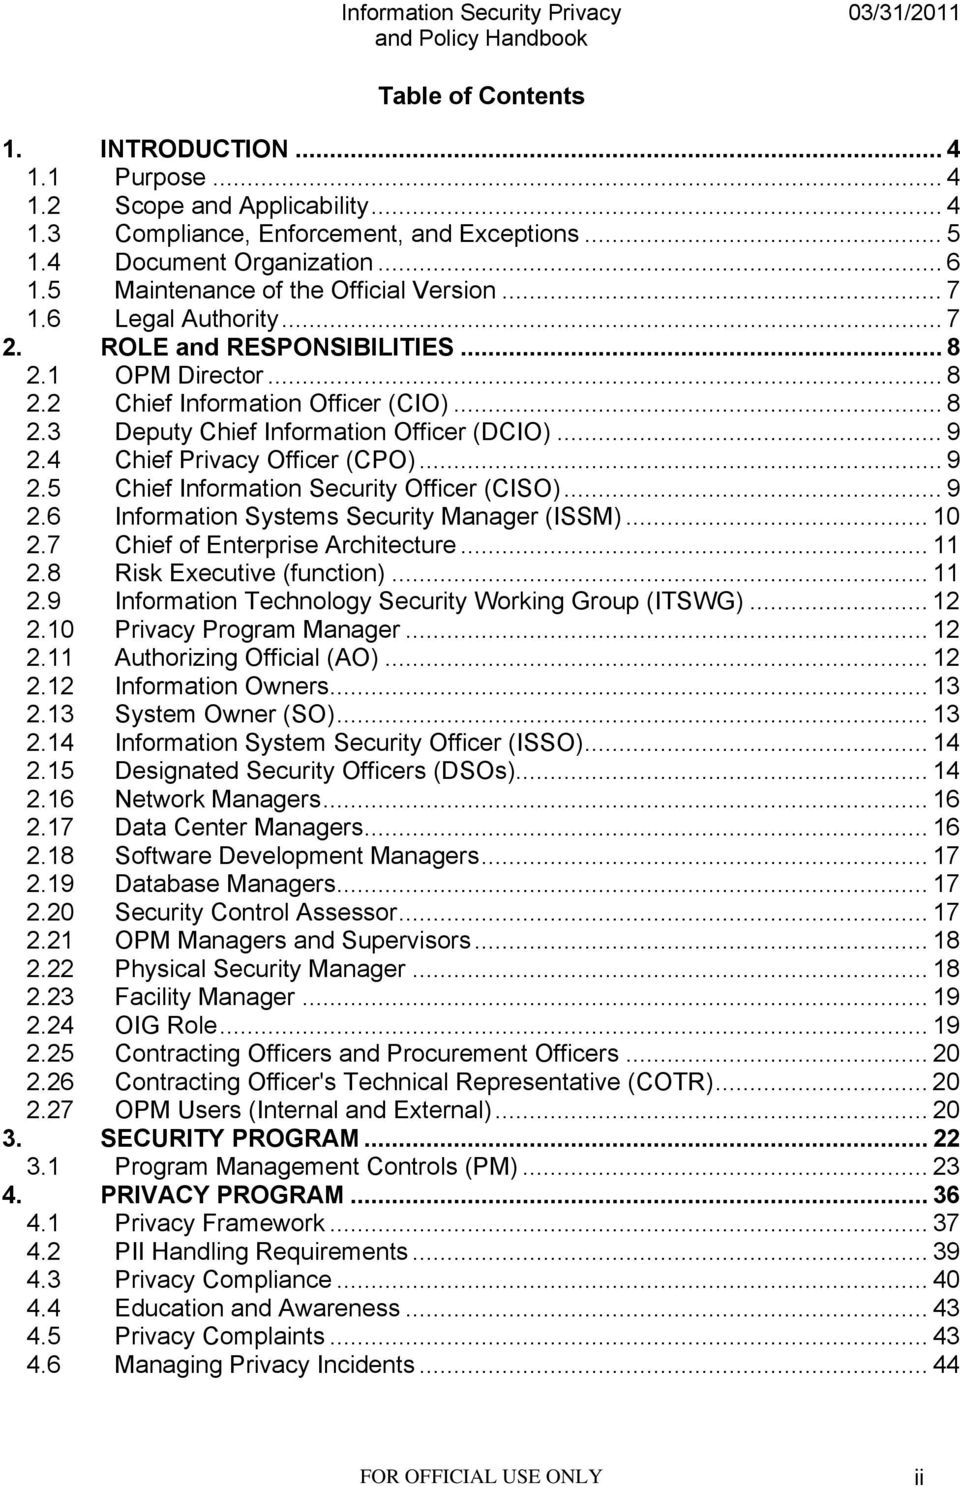 .. 9 2.4 Chief Privacy Officer (CPO)... 9 2.5 Chief Information Security Officer (CISO)... 9 2.6 Information Systems Security Manager (ISSM)... 10 2.7 Chief of Enterprise Architecture... 11 2.